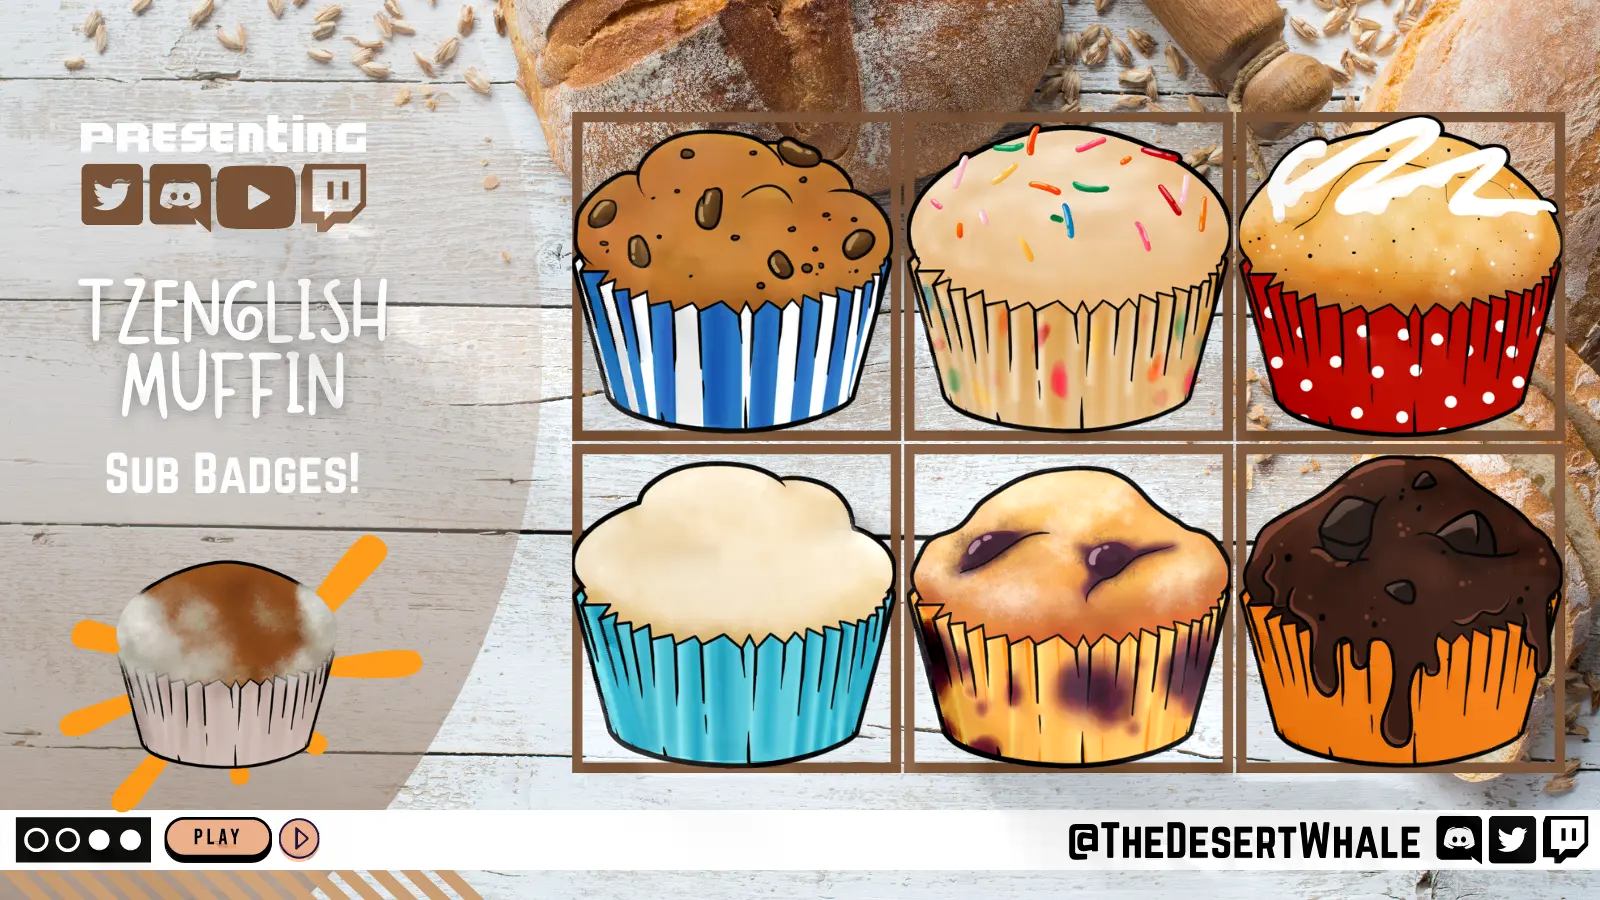 Various muffin styled Sub badges for Tzenglishmuffin